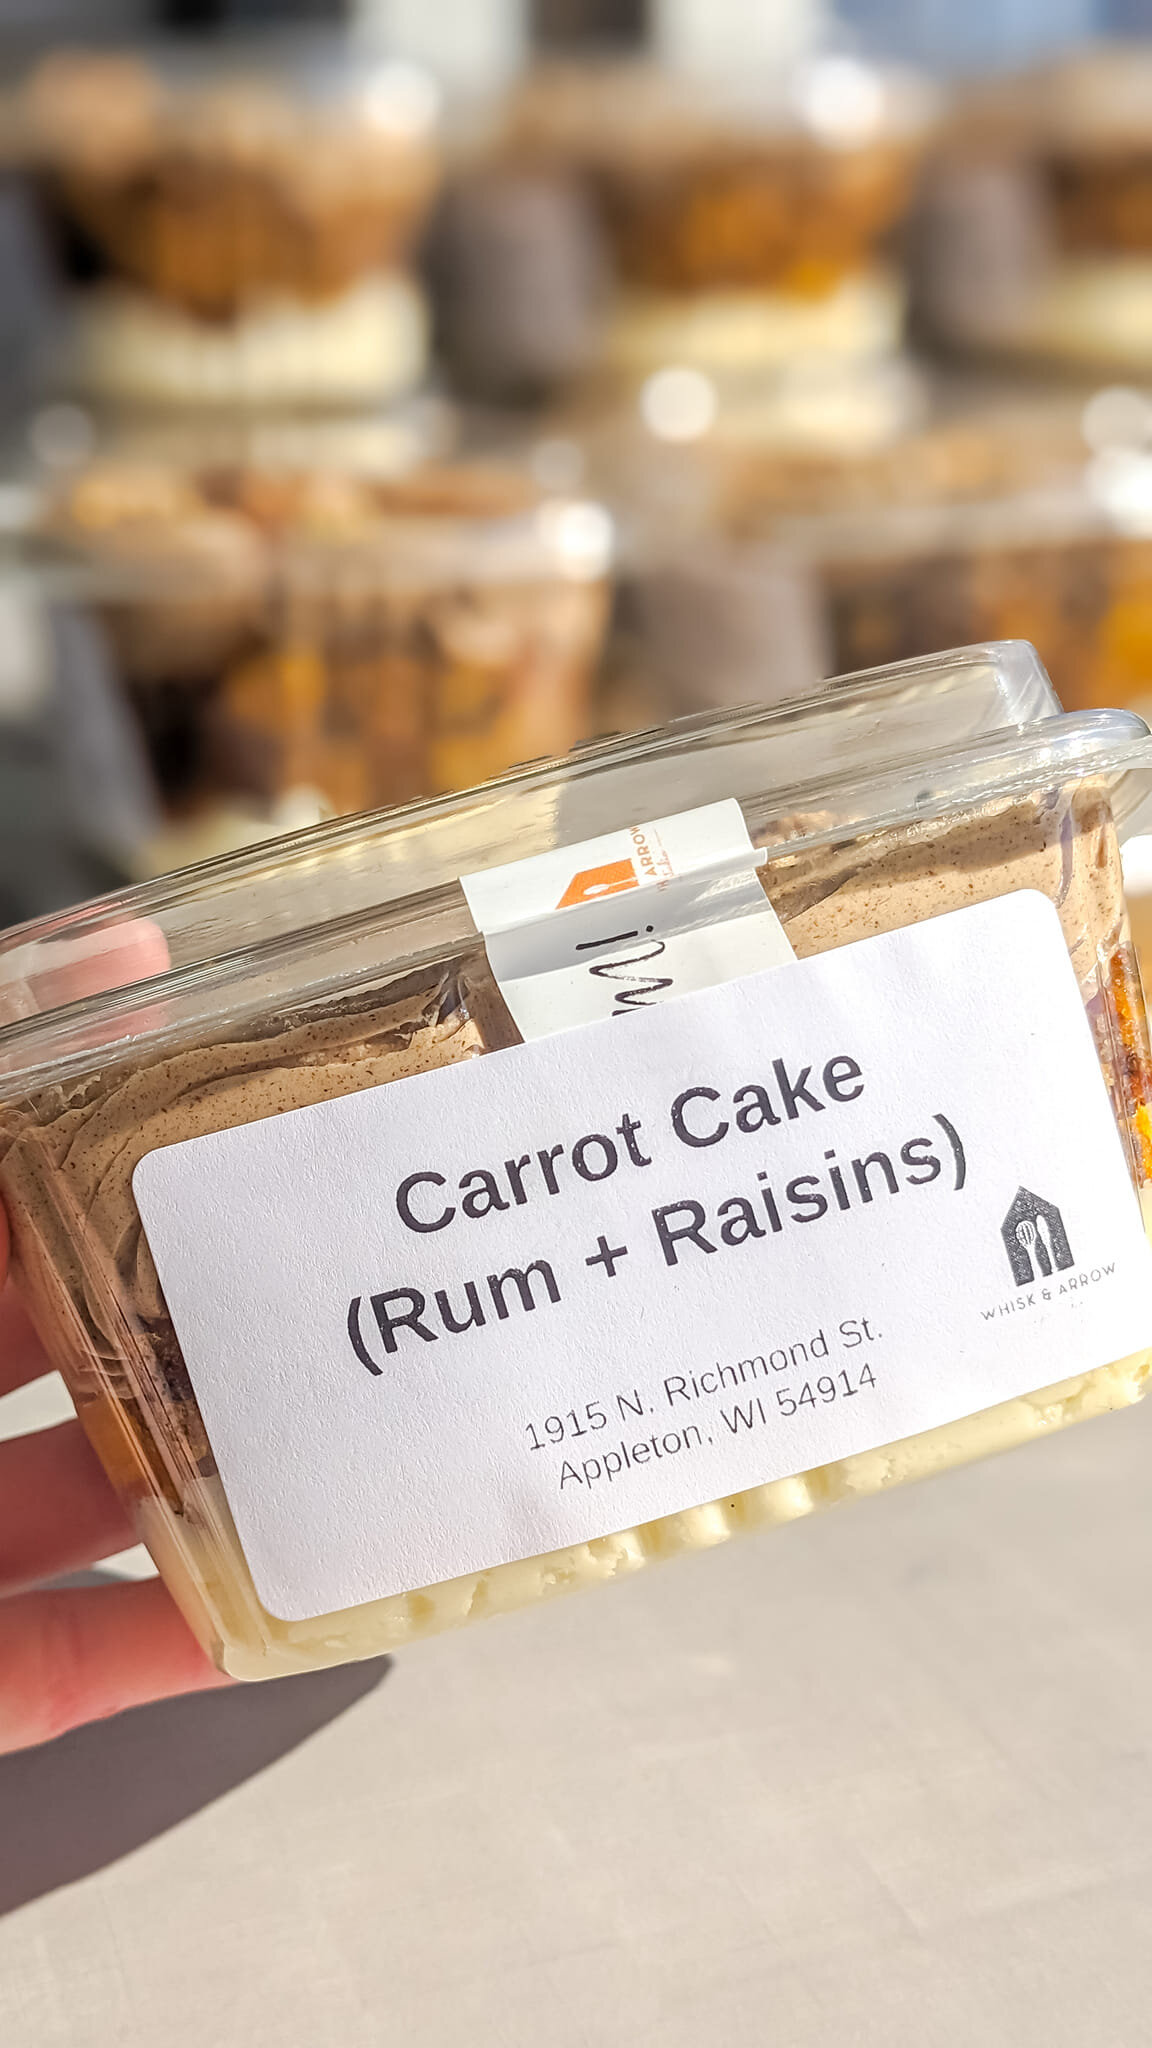 Cake team has some carrot cake boxes for you, just in time for Easter! 
Hop on in today to get yours. 🐰🥕

https://whisk-arrow.square.site/